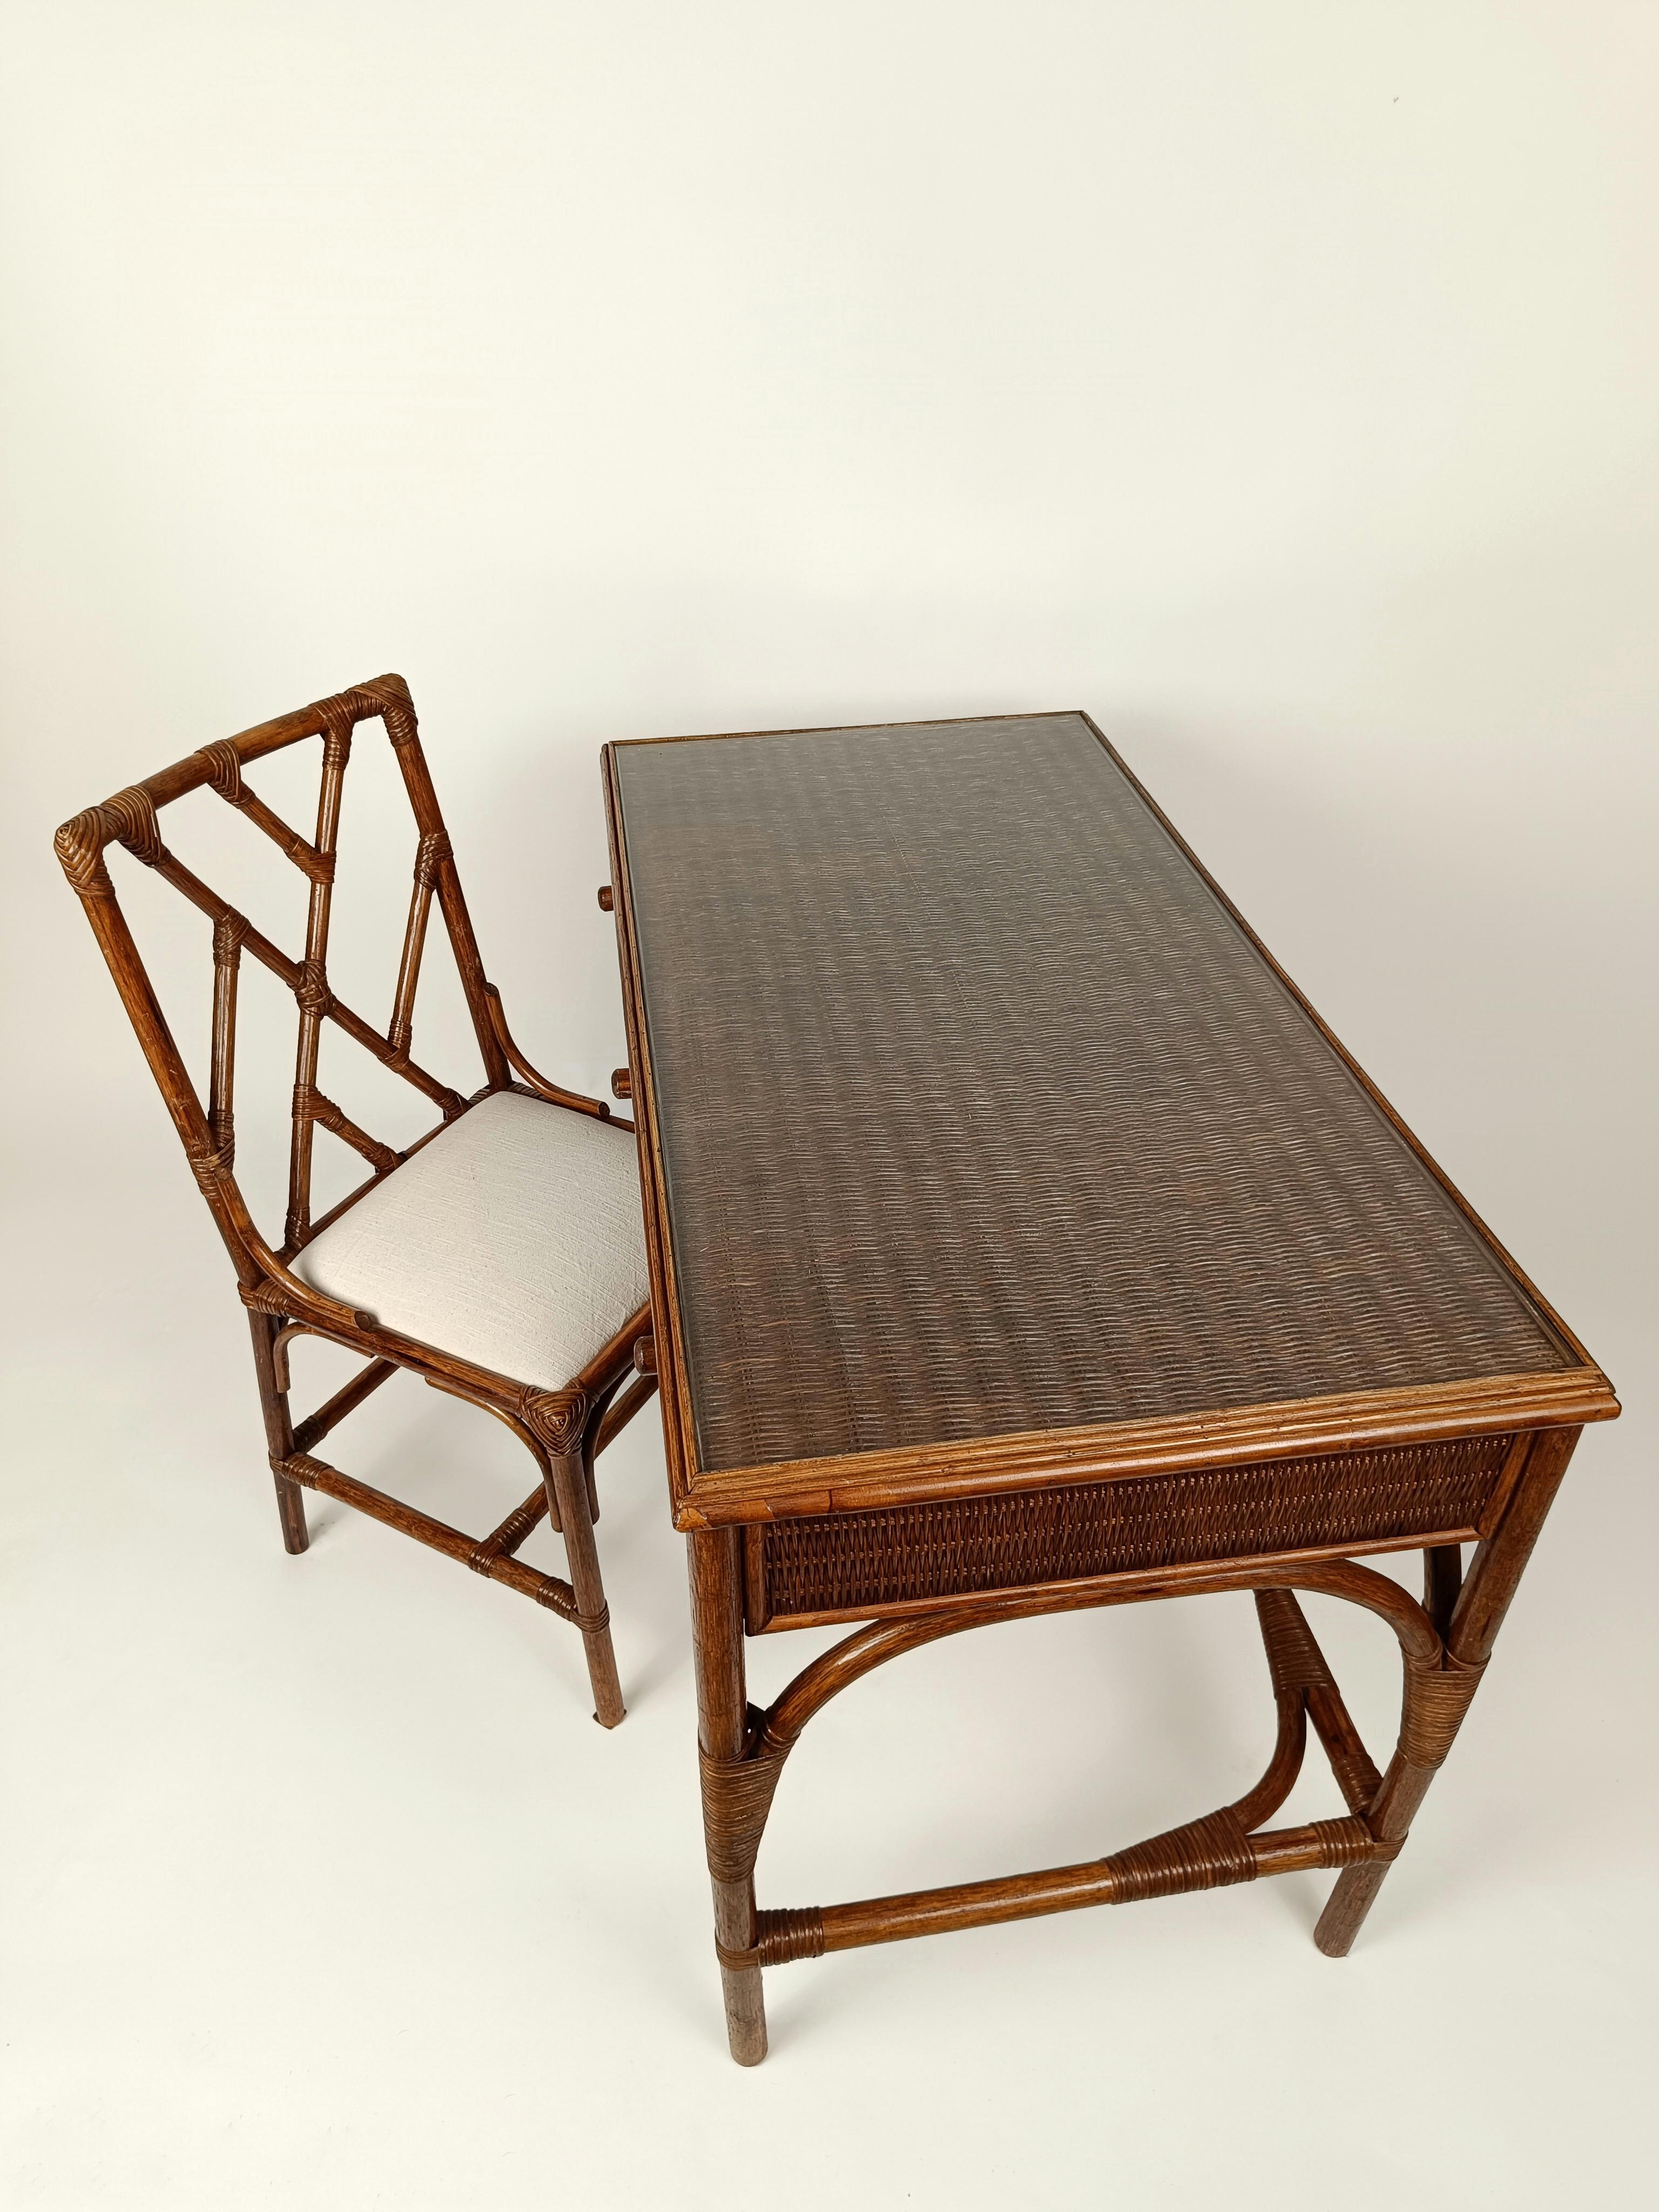 20th Century Midcentury Italian Writing Desk with Drawers and Chair, in Bamboo Cane & Wicker For Sale